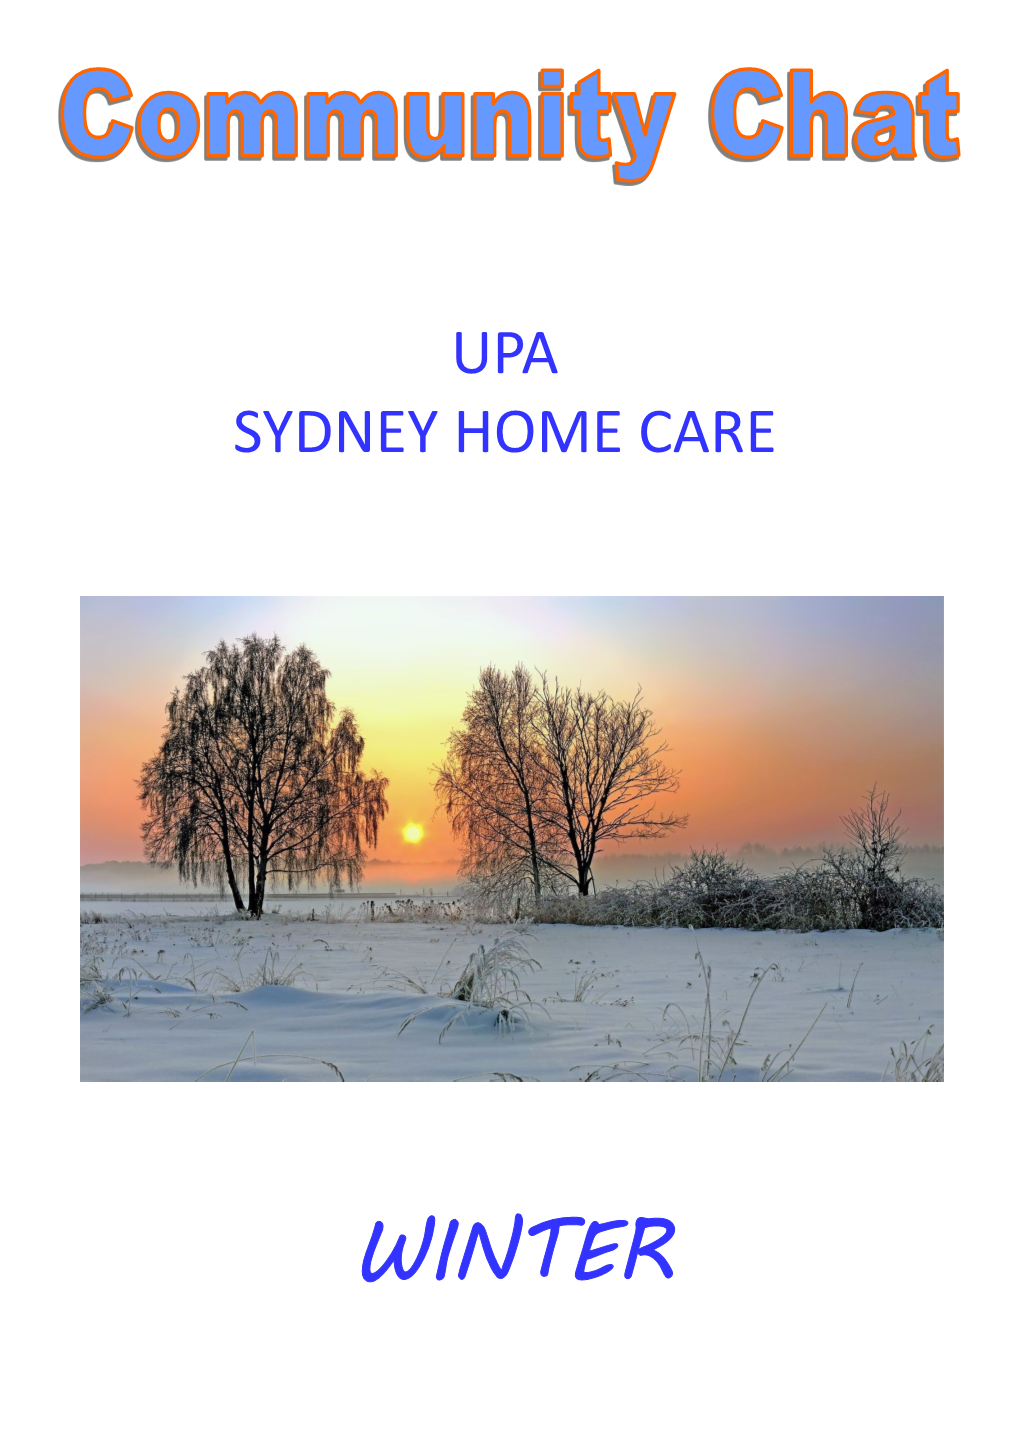 Sydney Home Care Community Chat June 2020